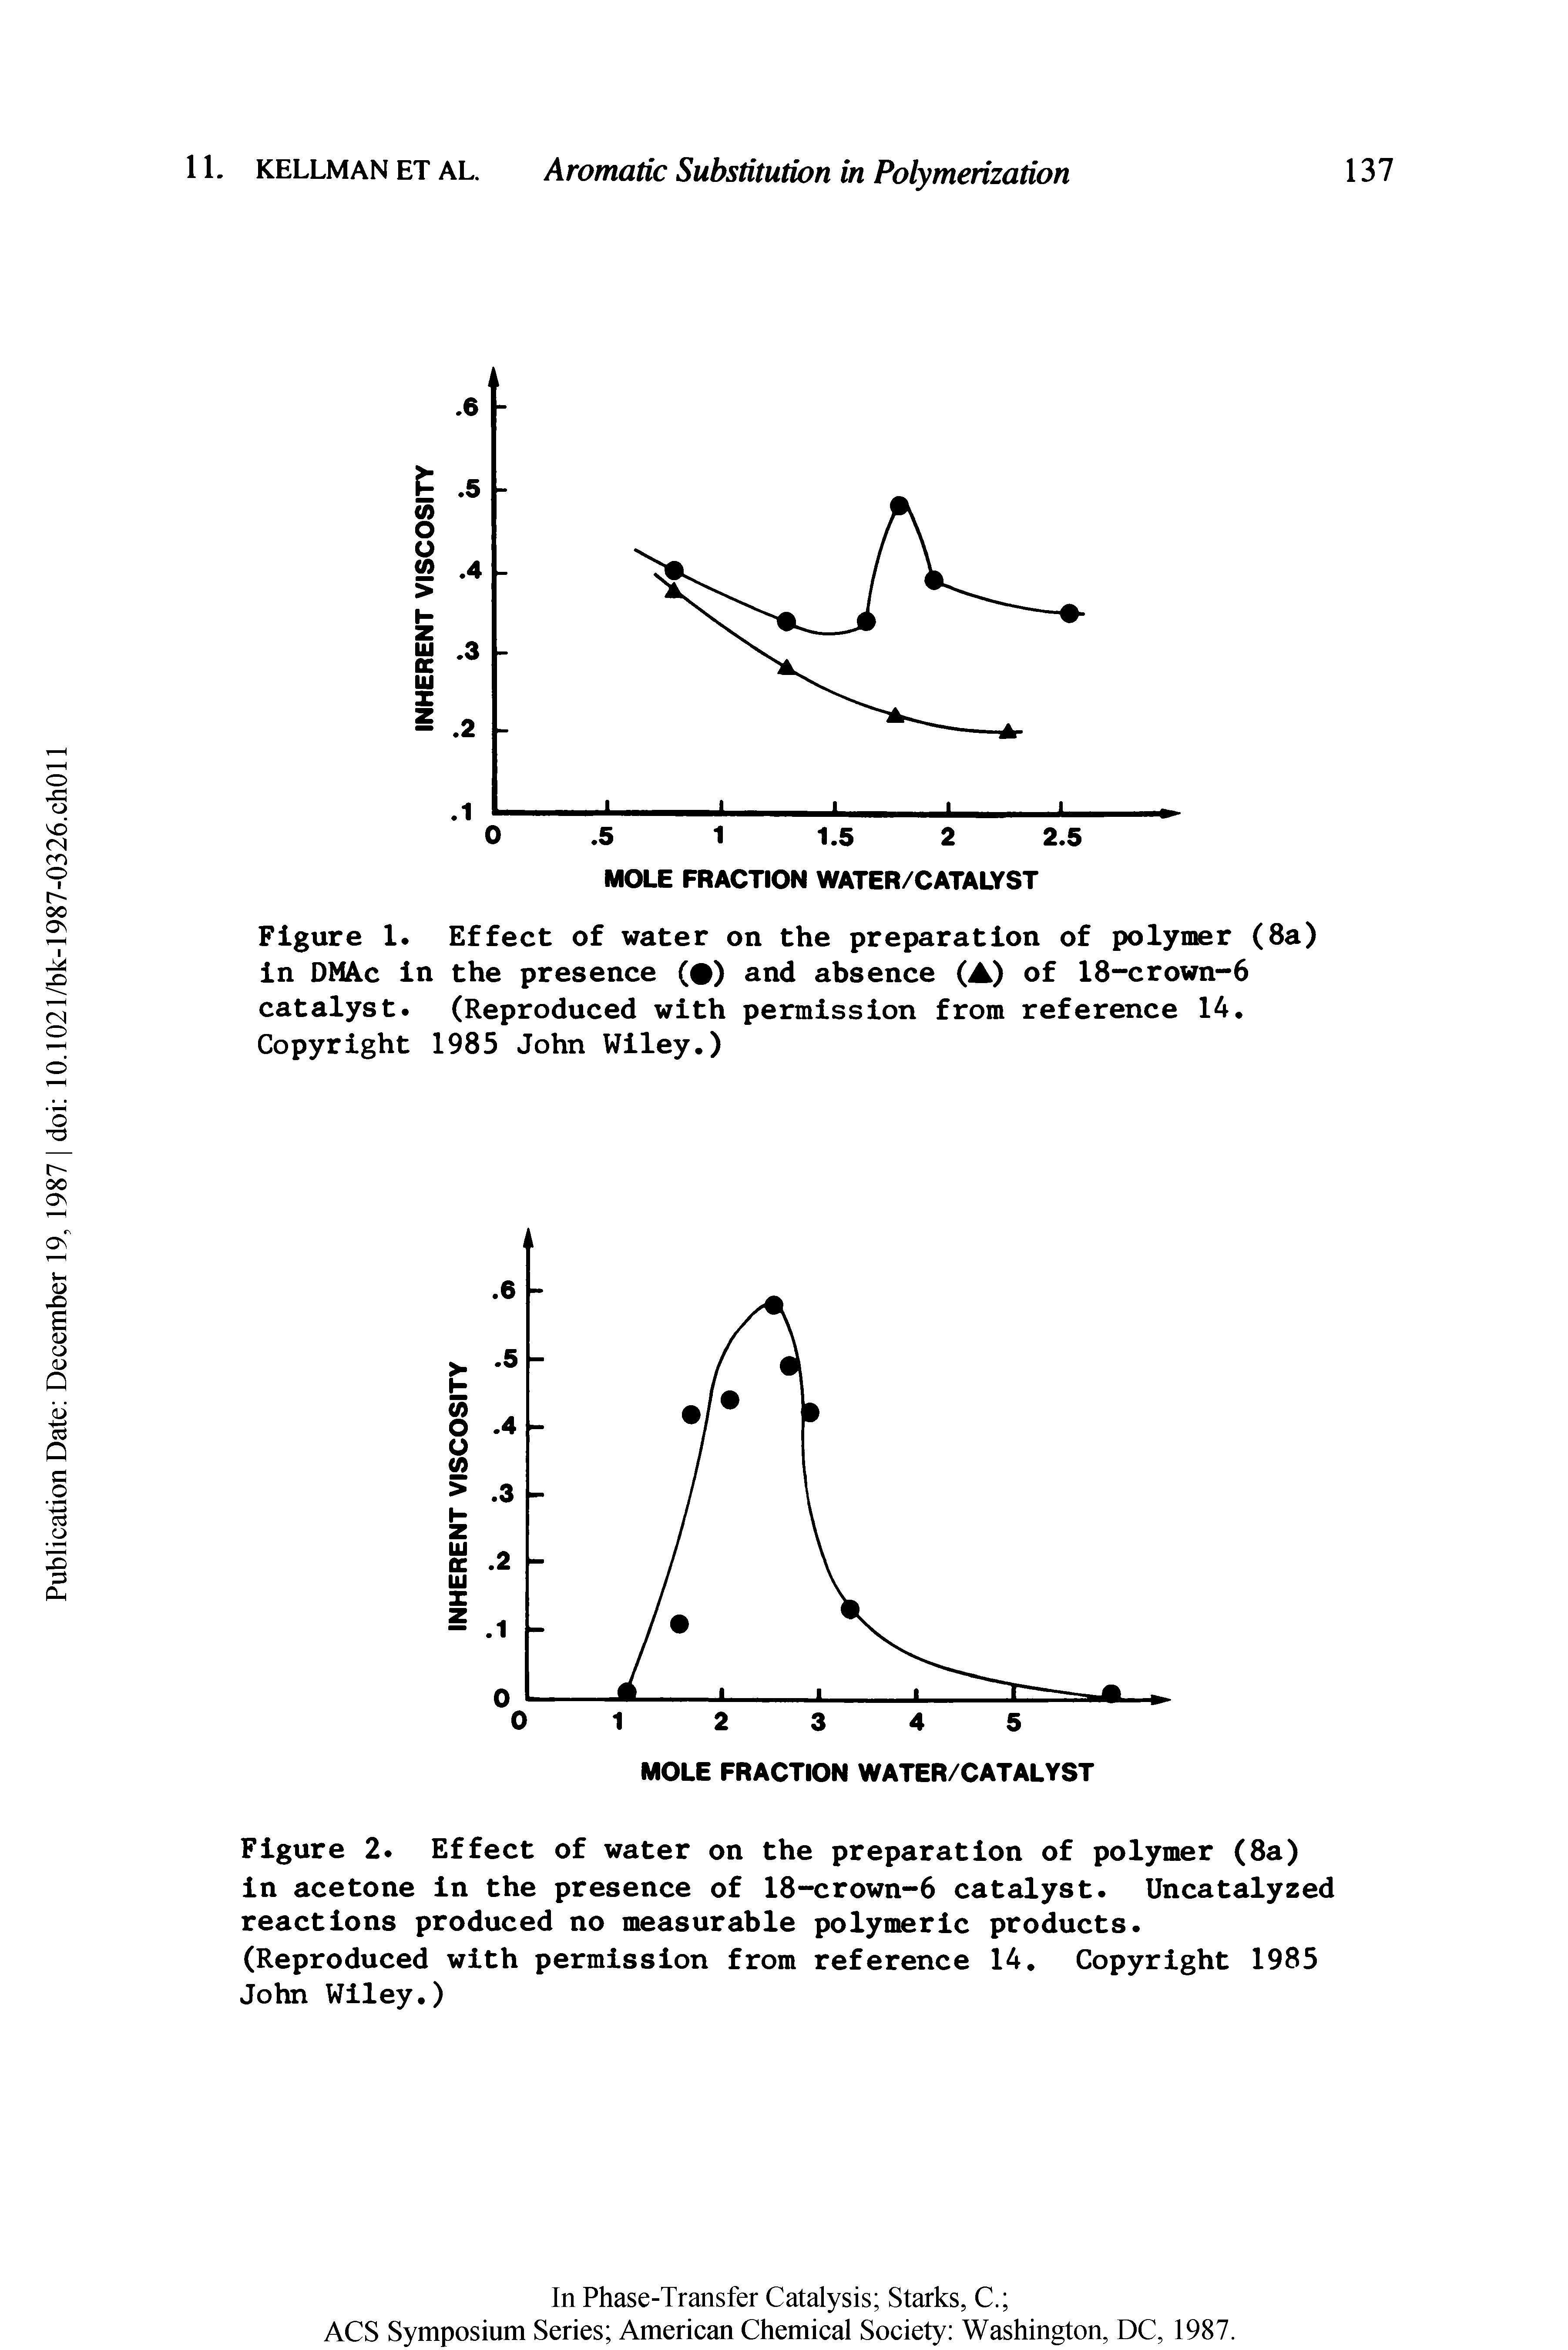 Figure 2. Effect of water on the preparation of polymer (8a) in acetone in the presence of 18-crown-6 catalyst. Uncatalyzed reactions produced no measurable polymeric products.